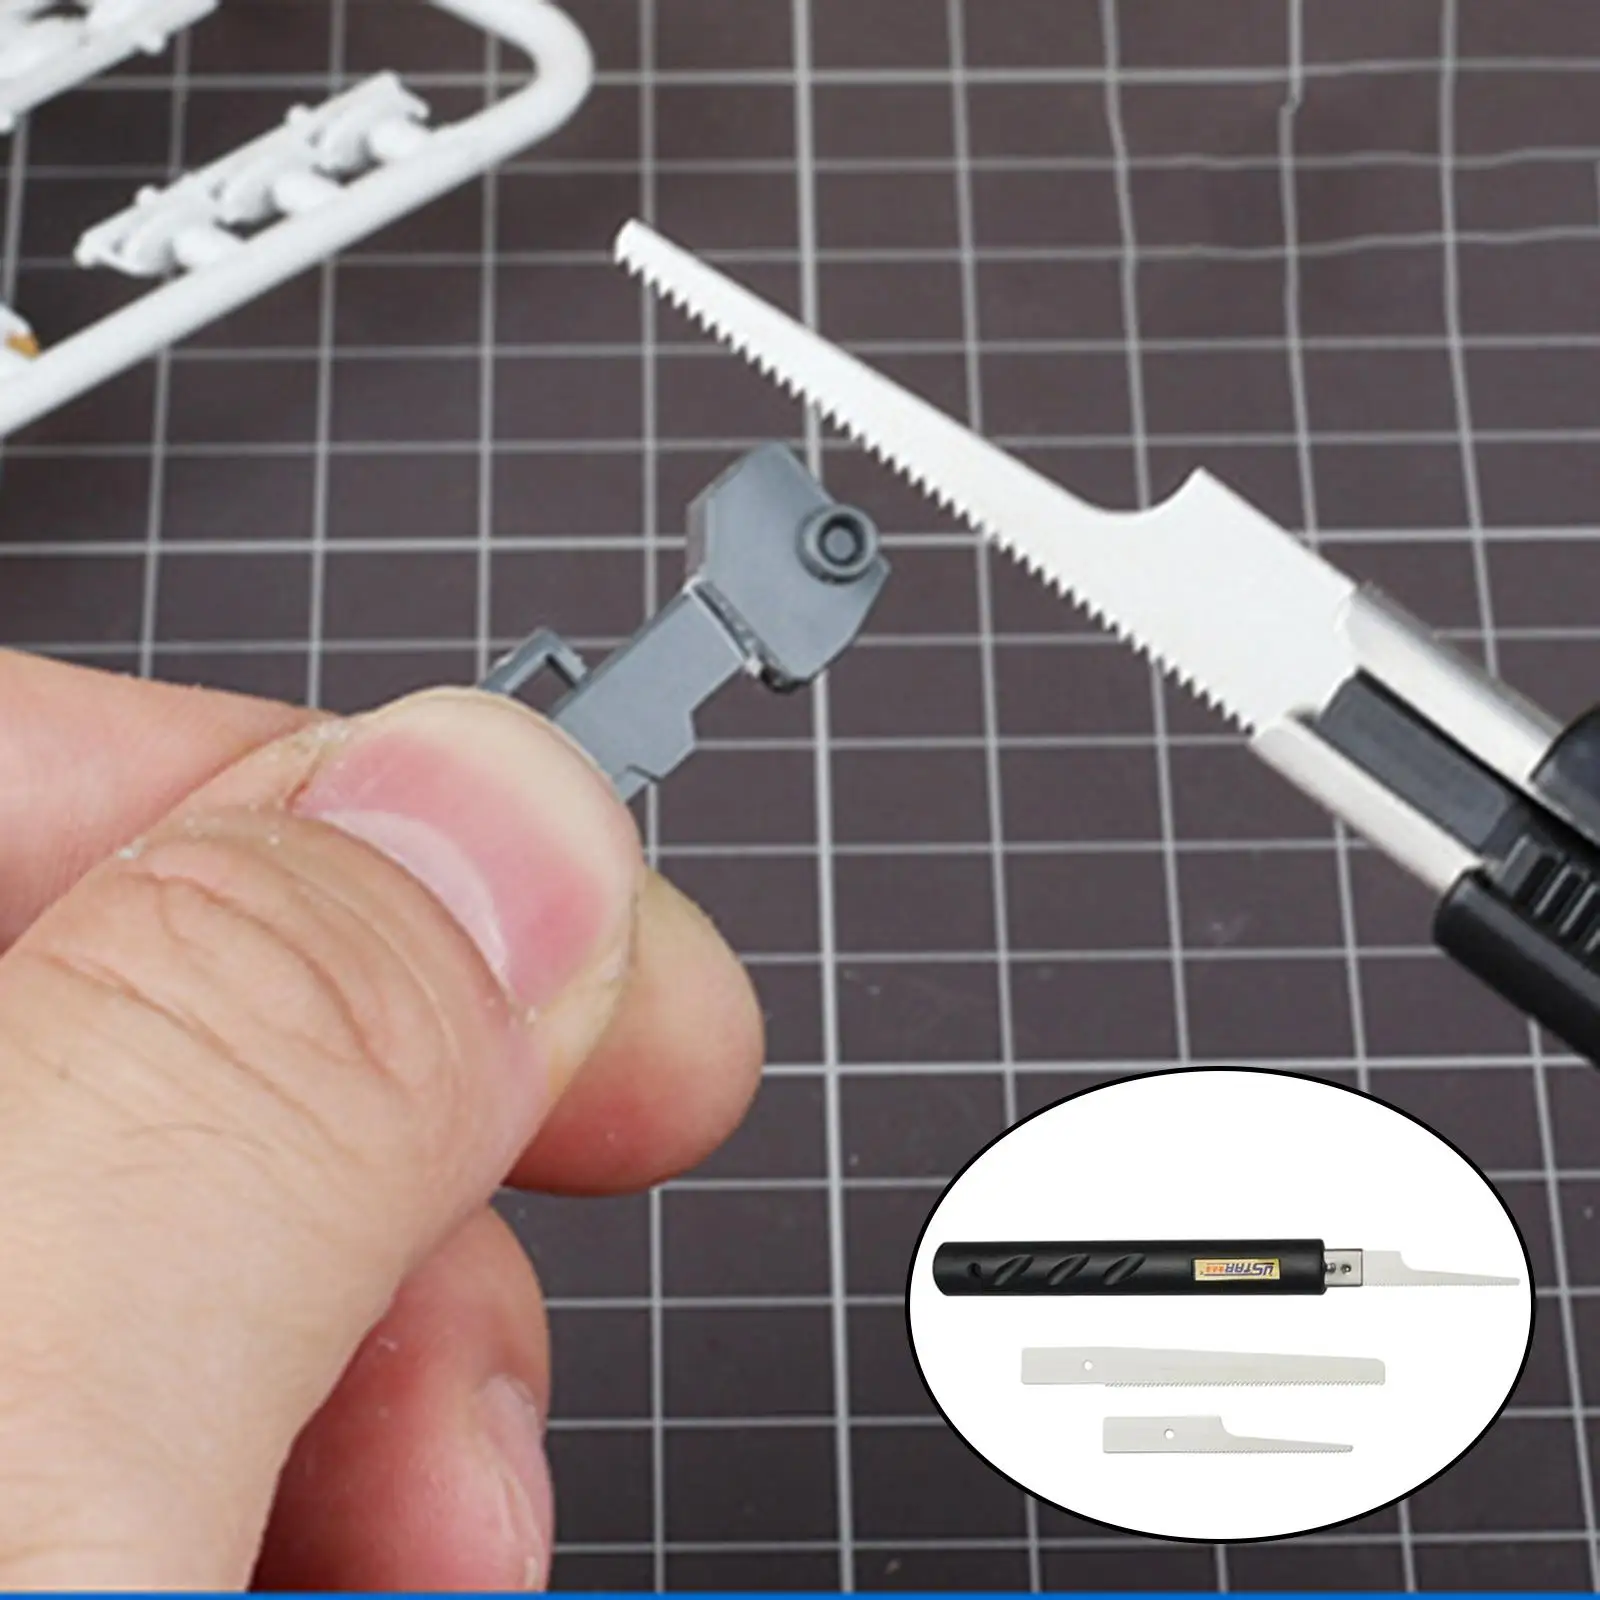 Mini Saw Deburring Hacksaw Cutter Multifunction Trimming Exquisite Tool Kit Small Hand Saw Handsaw for 600